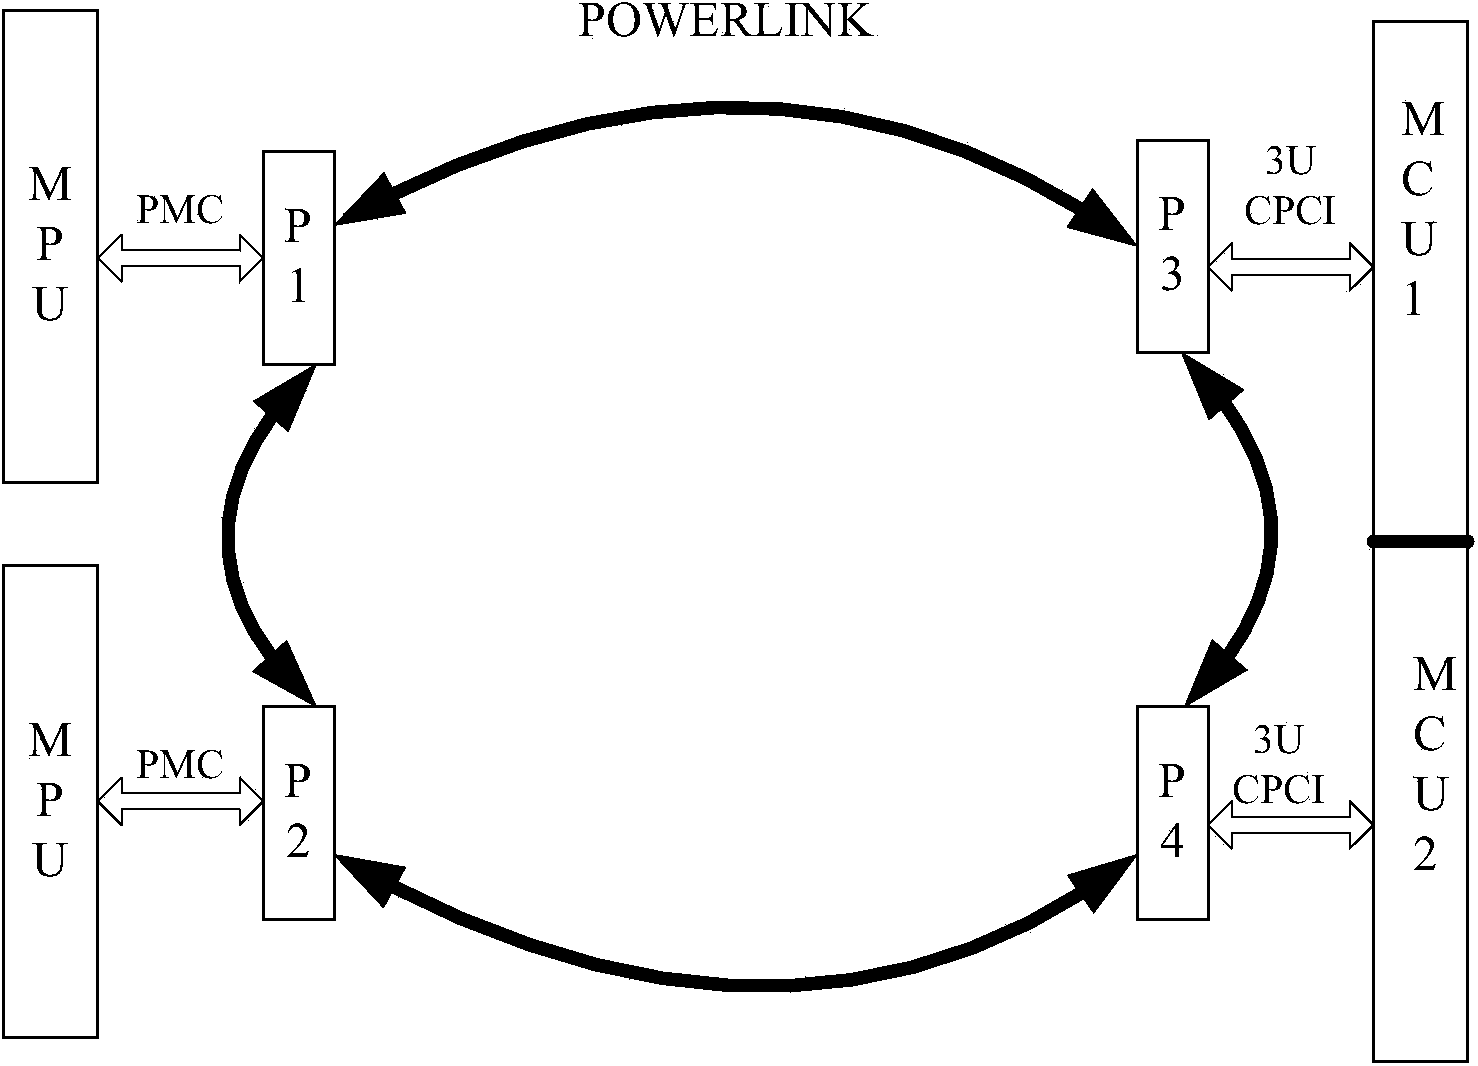 Inter-board communication component based on POWERLINK technology